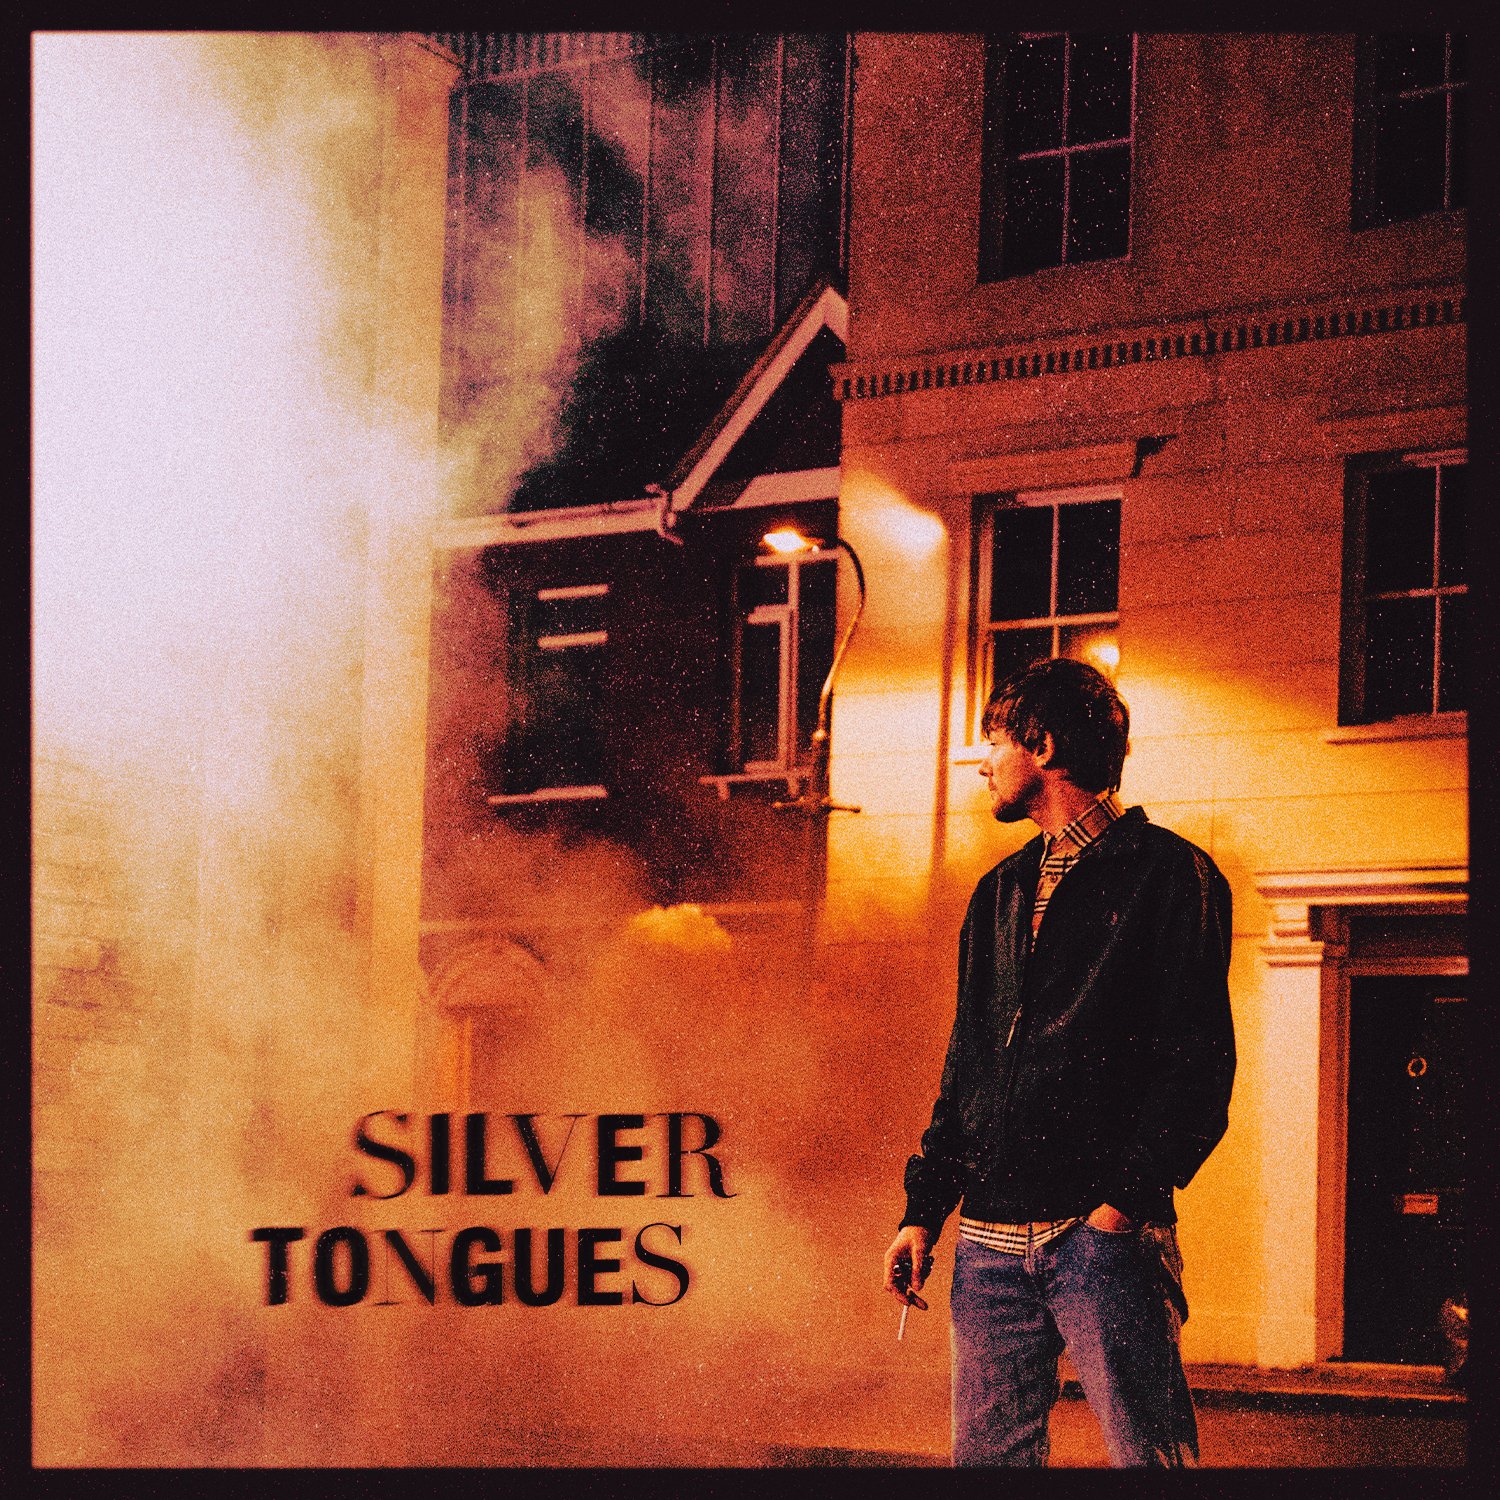 LOUIS TOMLINSON RELEASES NEW SINGLE “SILVER TONGUES” AHEAD OF